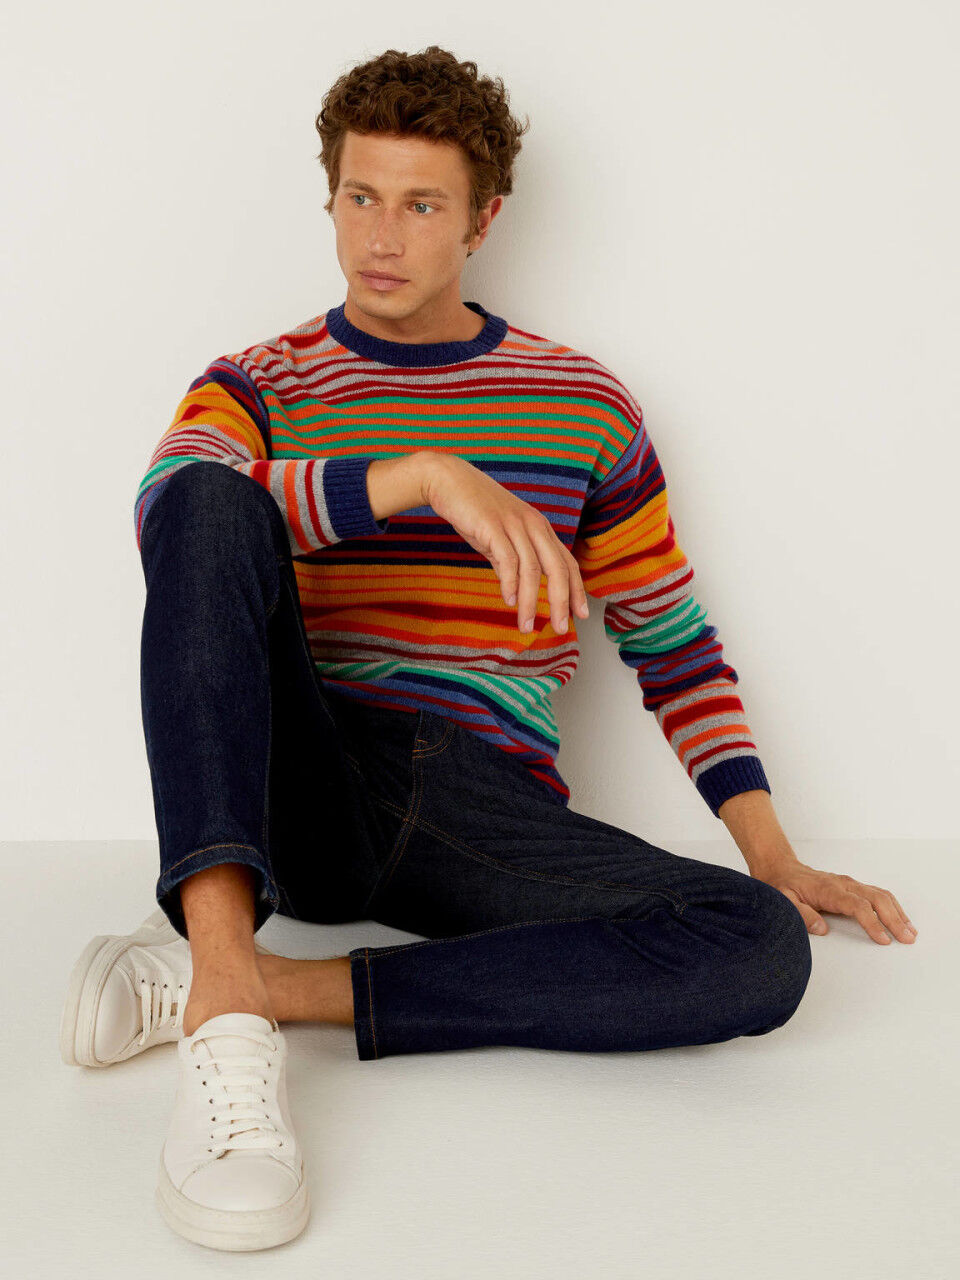 Men's Knitwear and Jumpers New Collection 2021 | Benetton